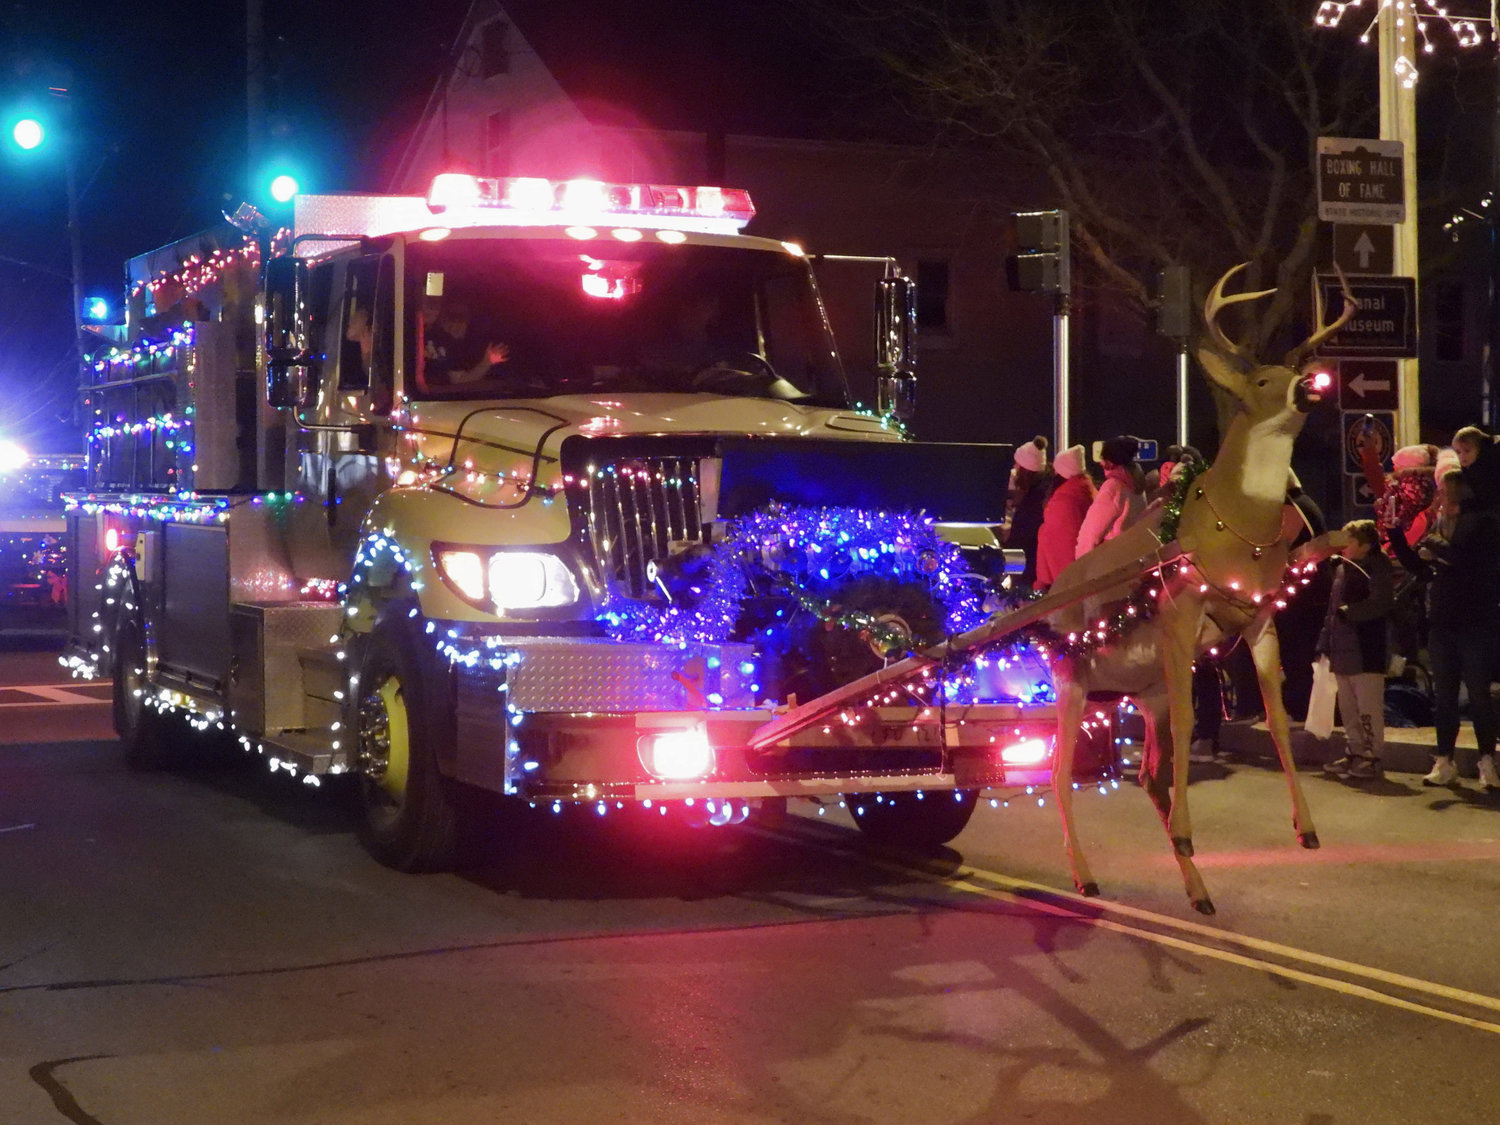 The Canastota Parade of Lights saw people fill the streets Saturday night to welcome in the holiday season. Organizations from Oneida to Syracuse were a part of the Parade. Pictured is the Canastota Fire Department's fire truck, strung with festive lights and guided by Rudolph the Red-Nosed Reindeer.